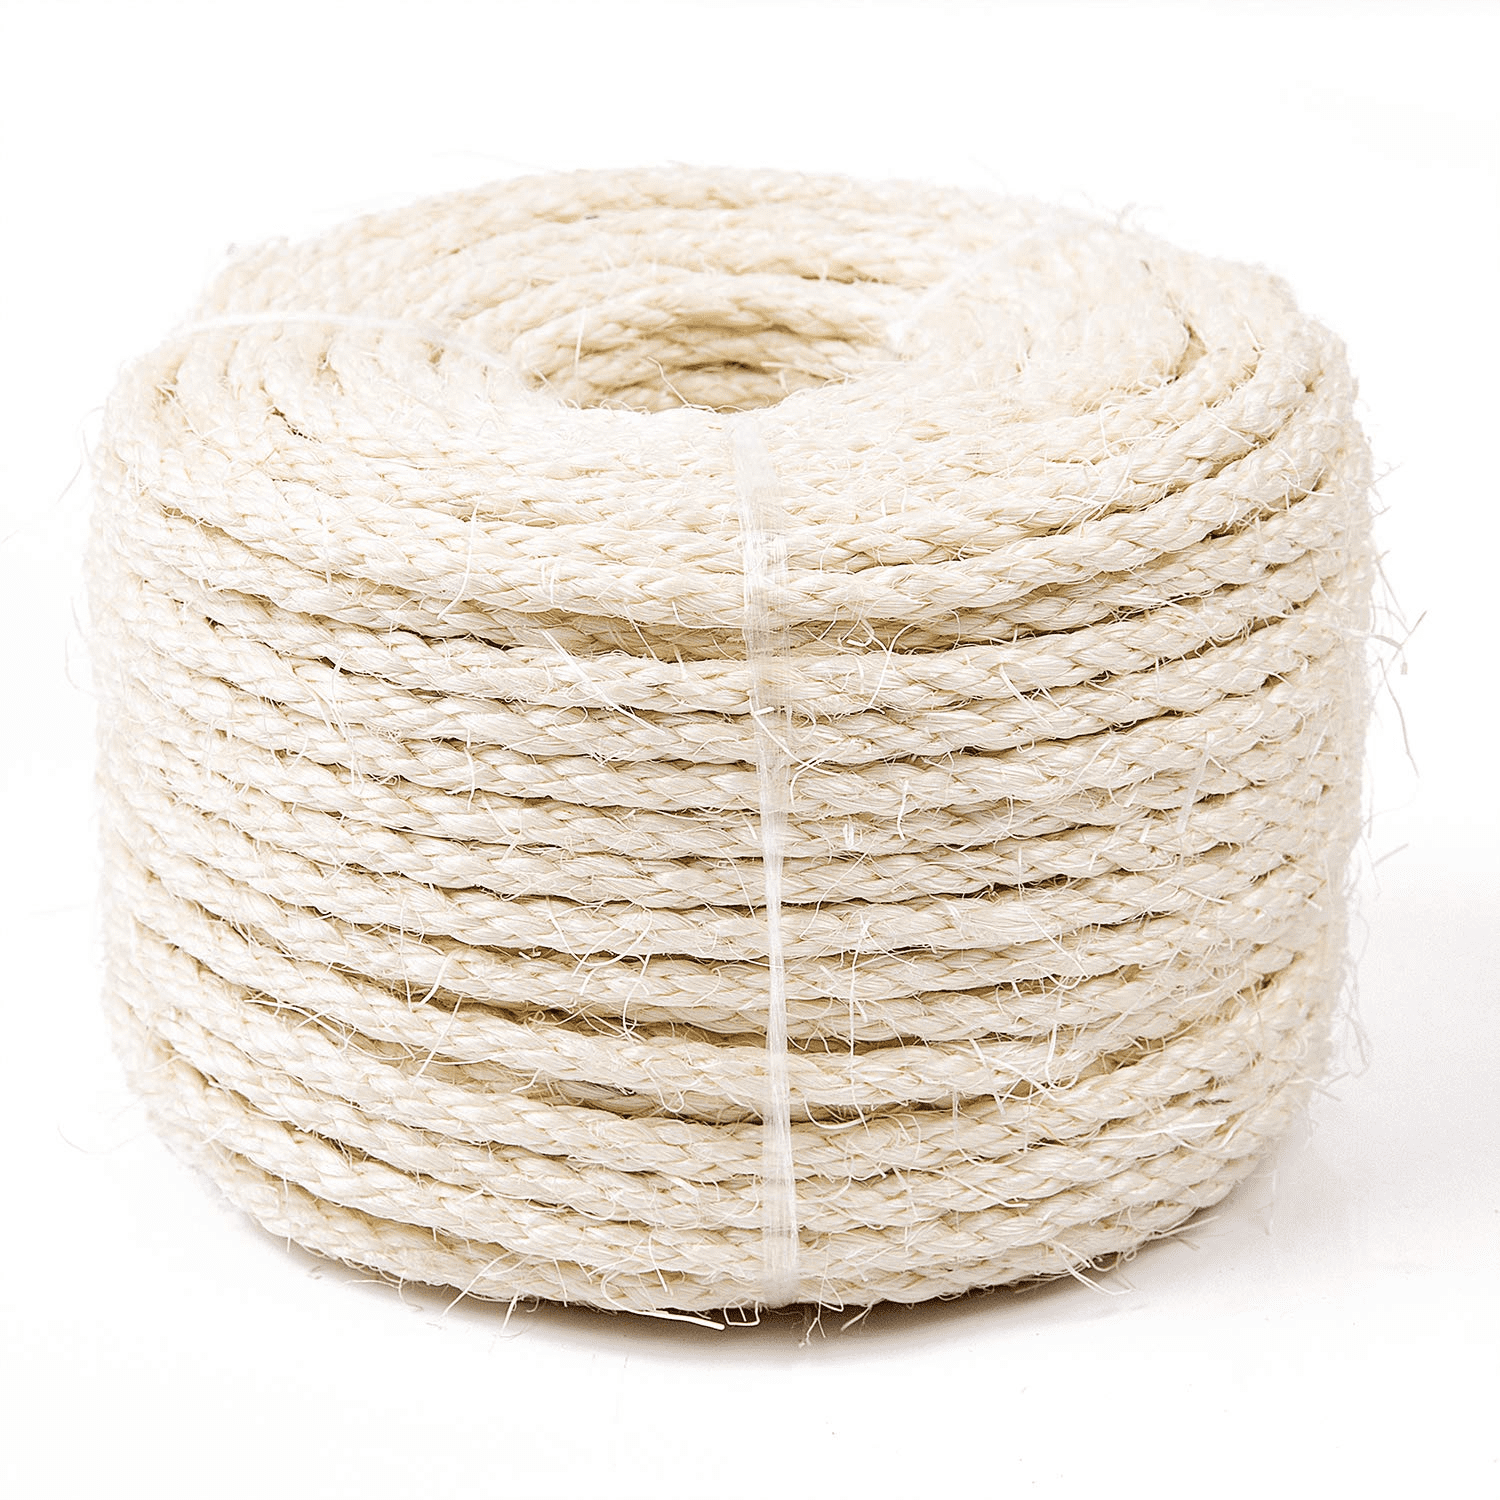 Decking Sisal Rope Natural Various Sizes/Lengths from 6 mm to 20 mm Cat Scratcher